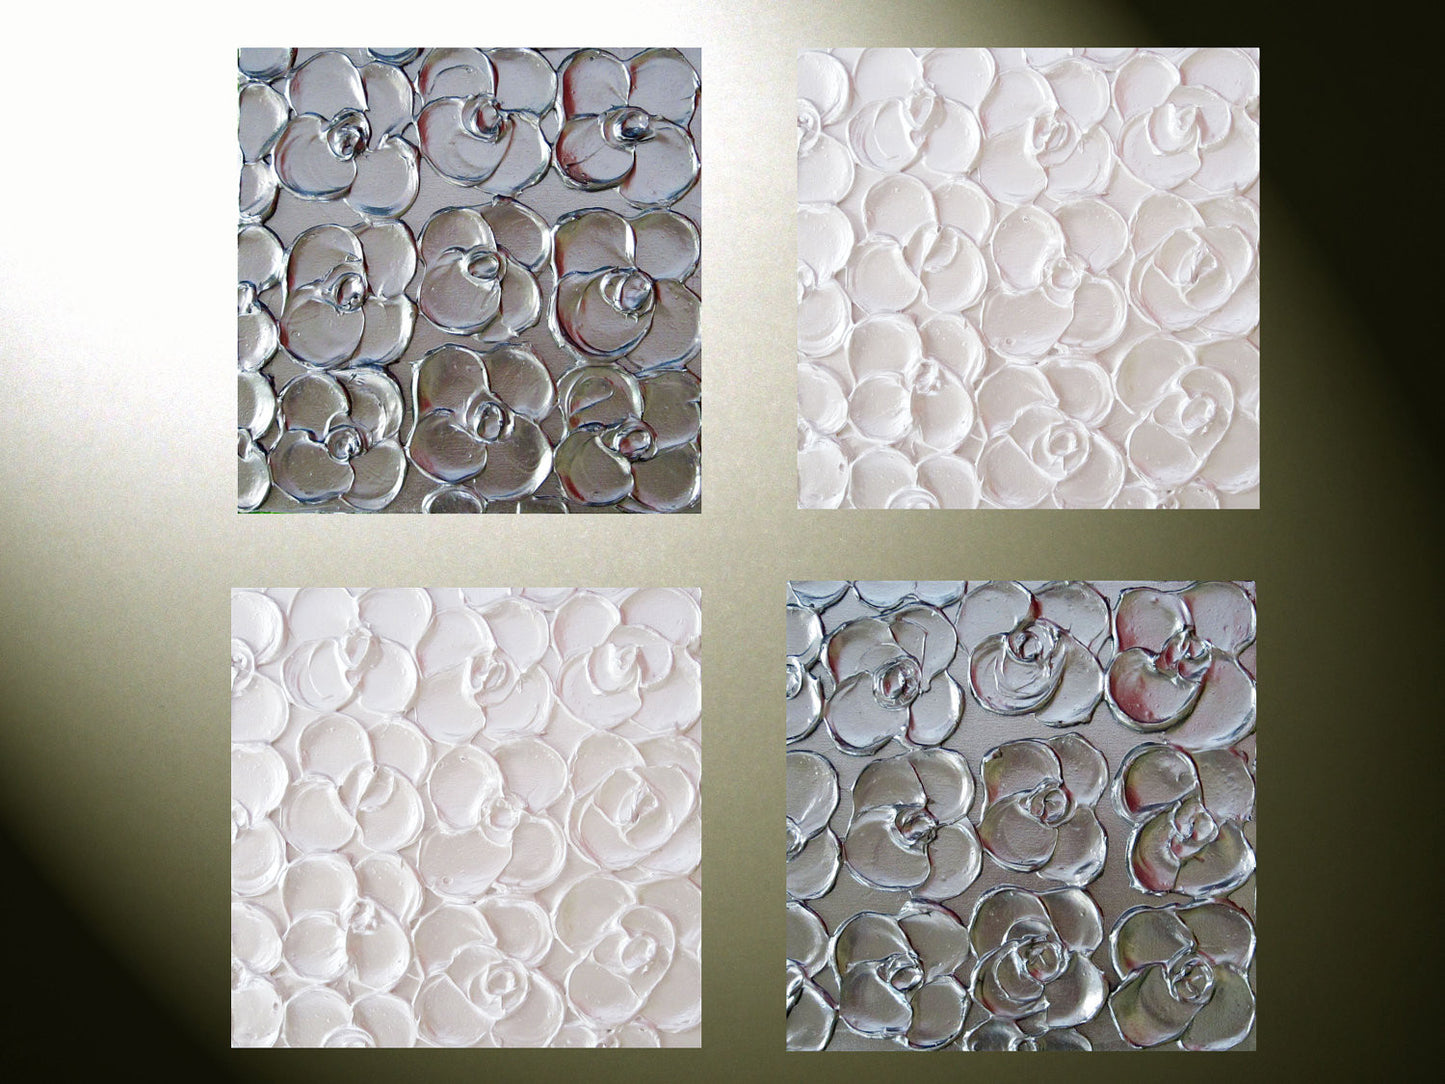 Custom Art Abstract Paintings Metallic Sculpted Wall Decor Set of 4 -12x12 Home Decor Gift Textured Silver Pearl White Flowers MADE TO ORDER - Christine Krainock Art - Contemporary Art by Christine - 1